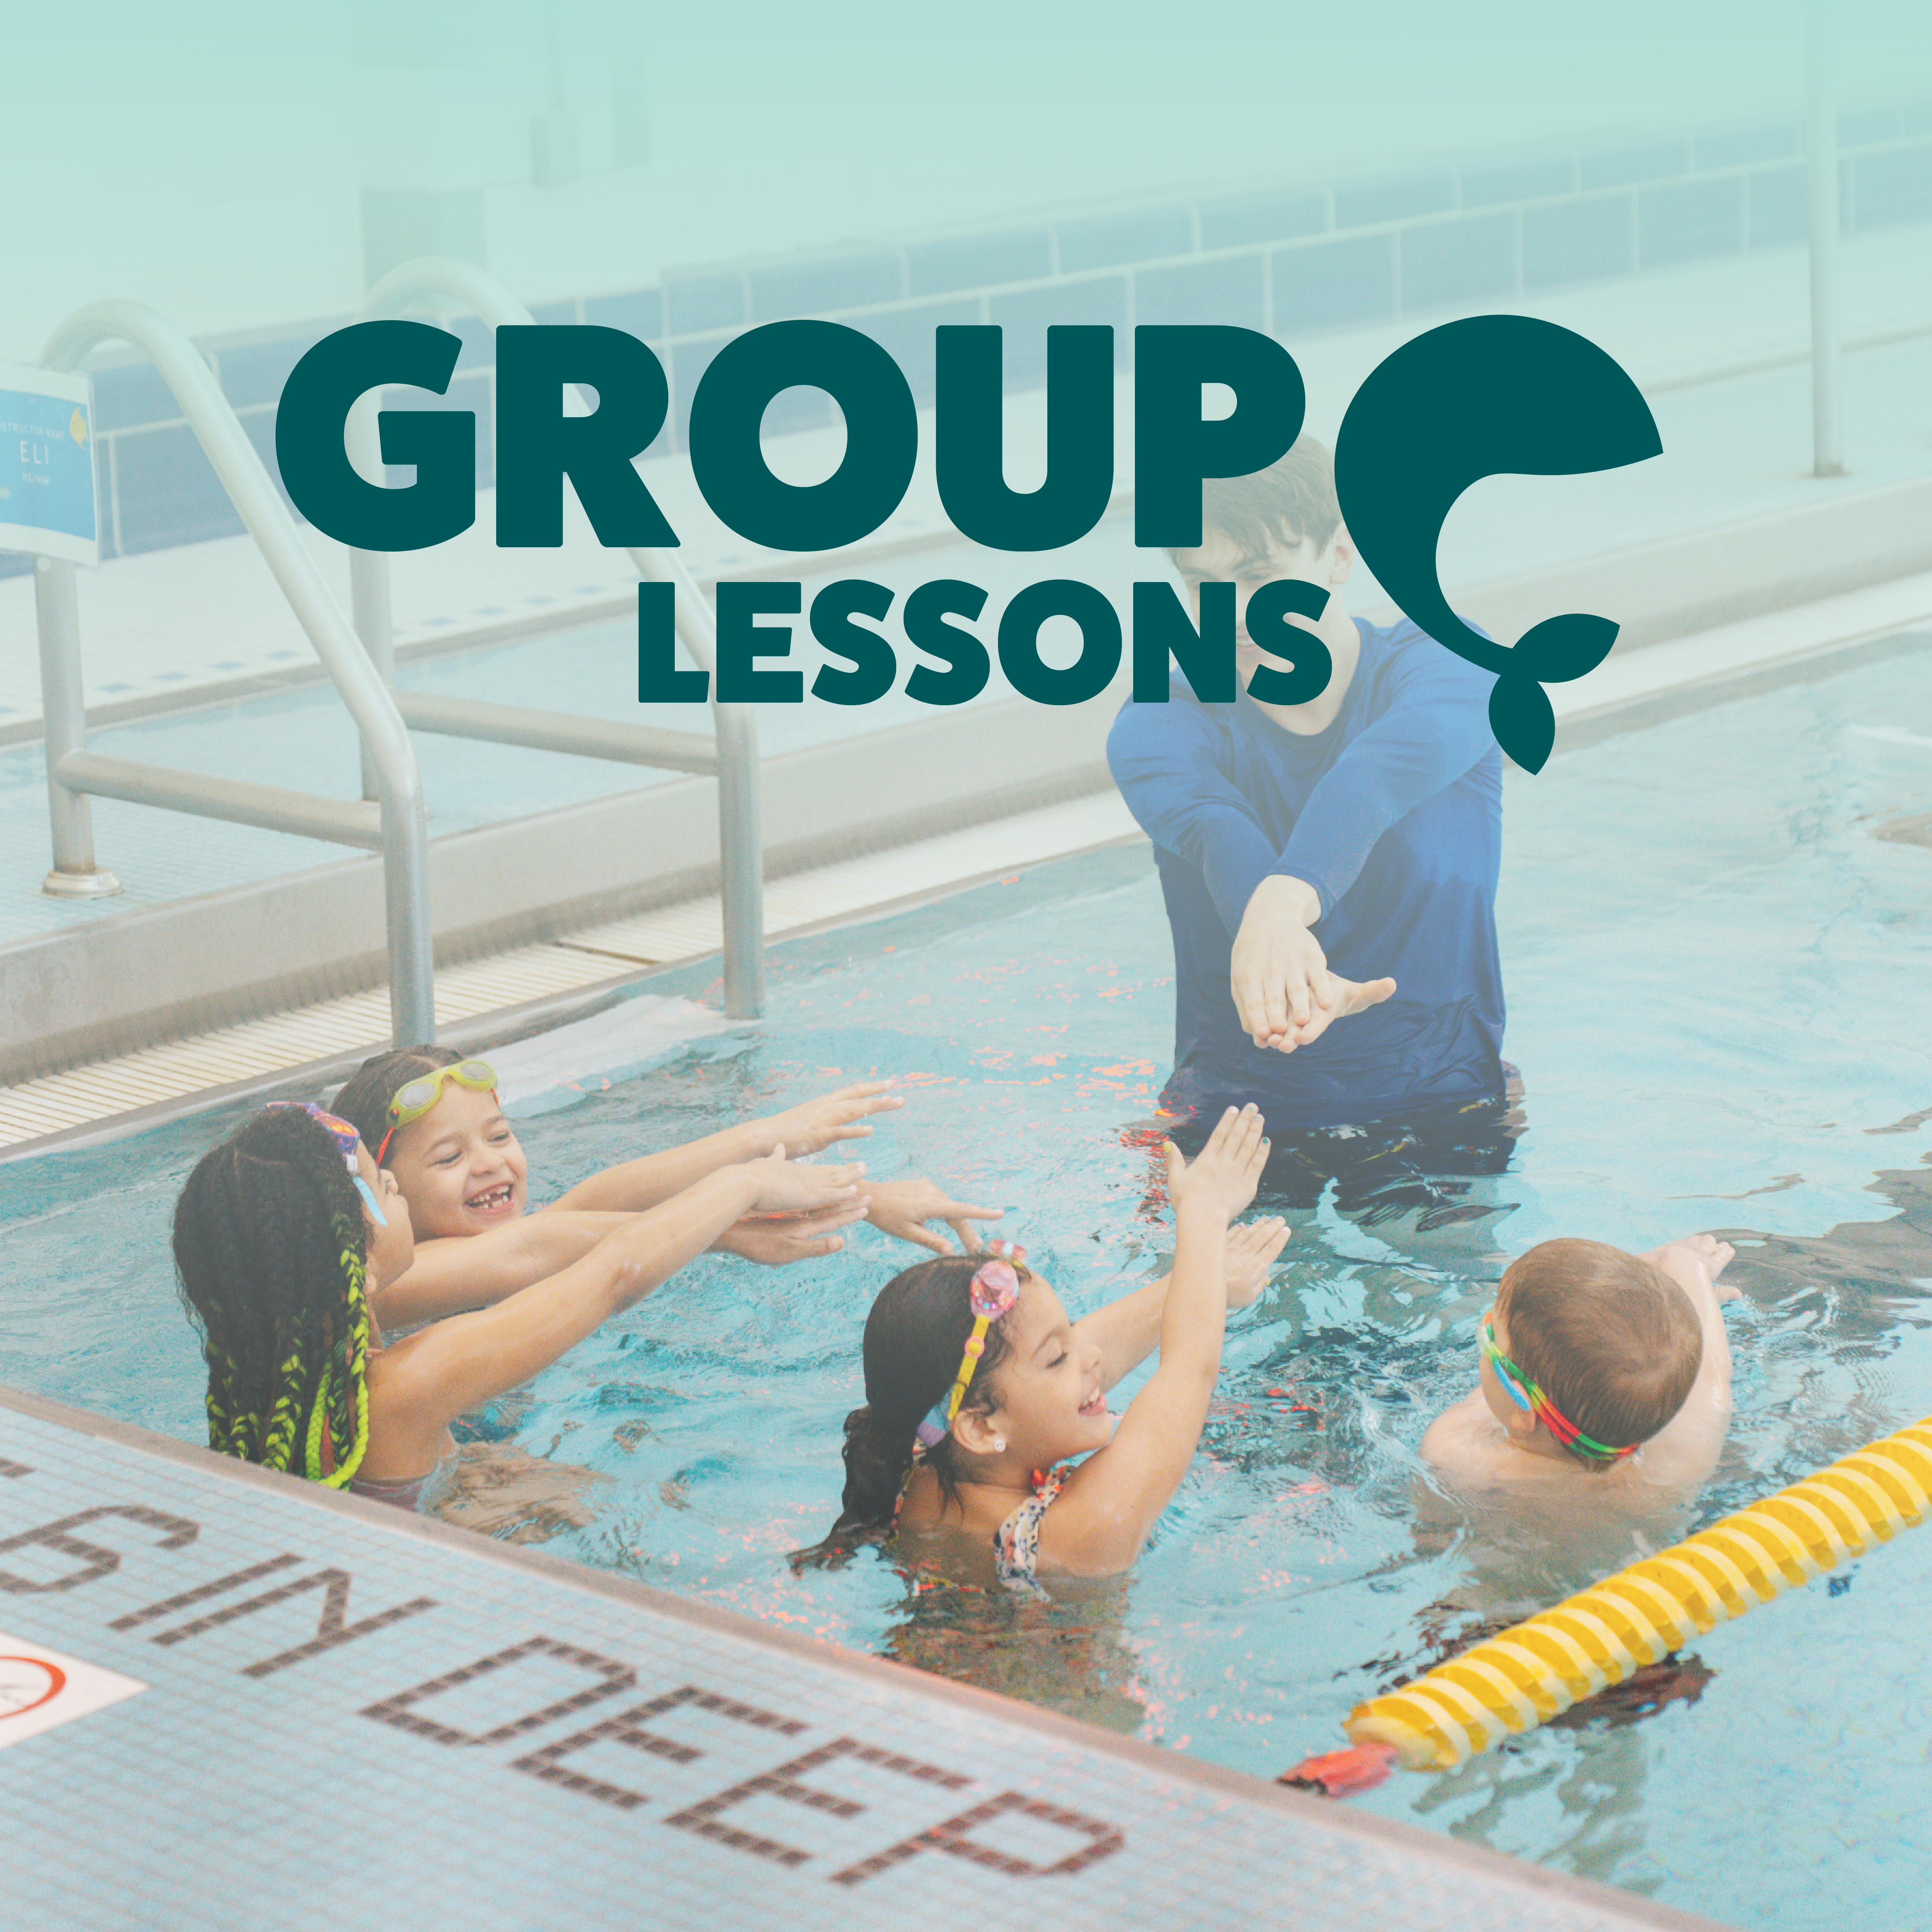 Four kids in pool with instructor with text "Group Lessons"